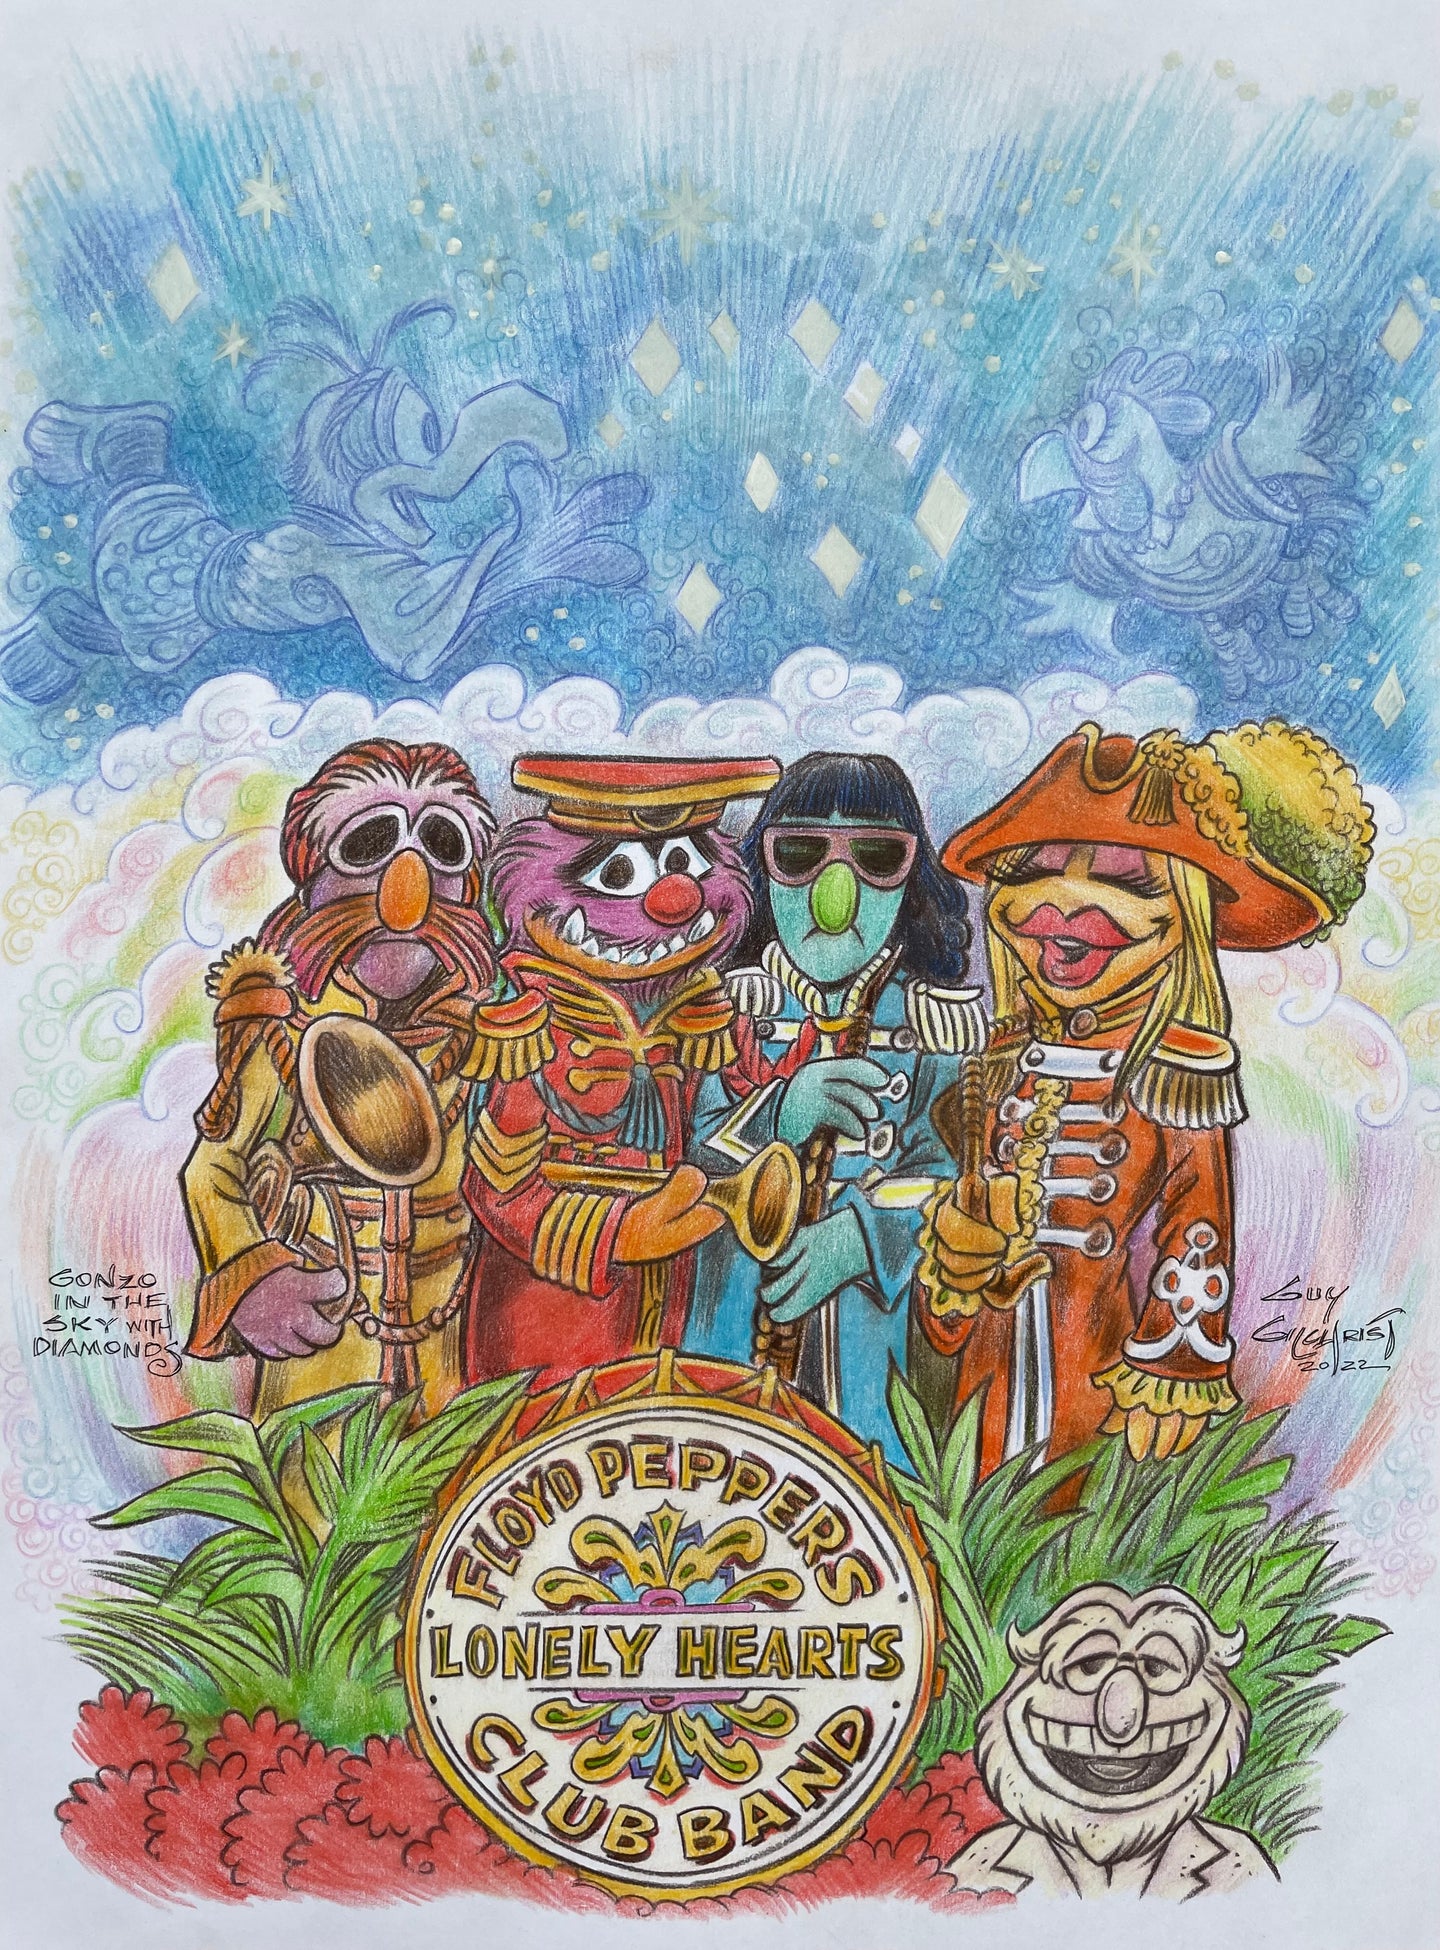 Gonzo in the Sky with Diamonds 11x14 Art Print - Created by Guy Gilchrist